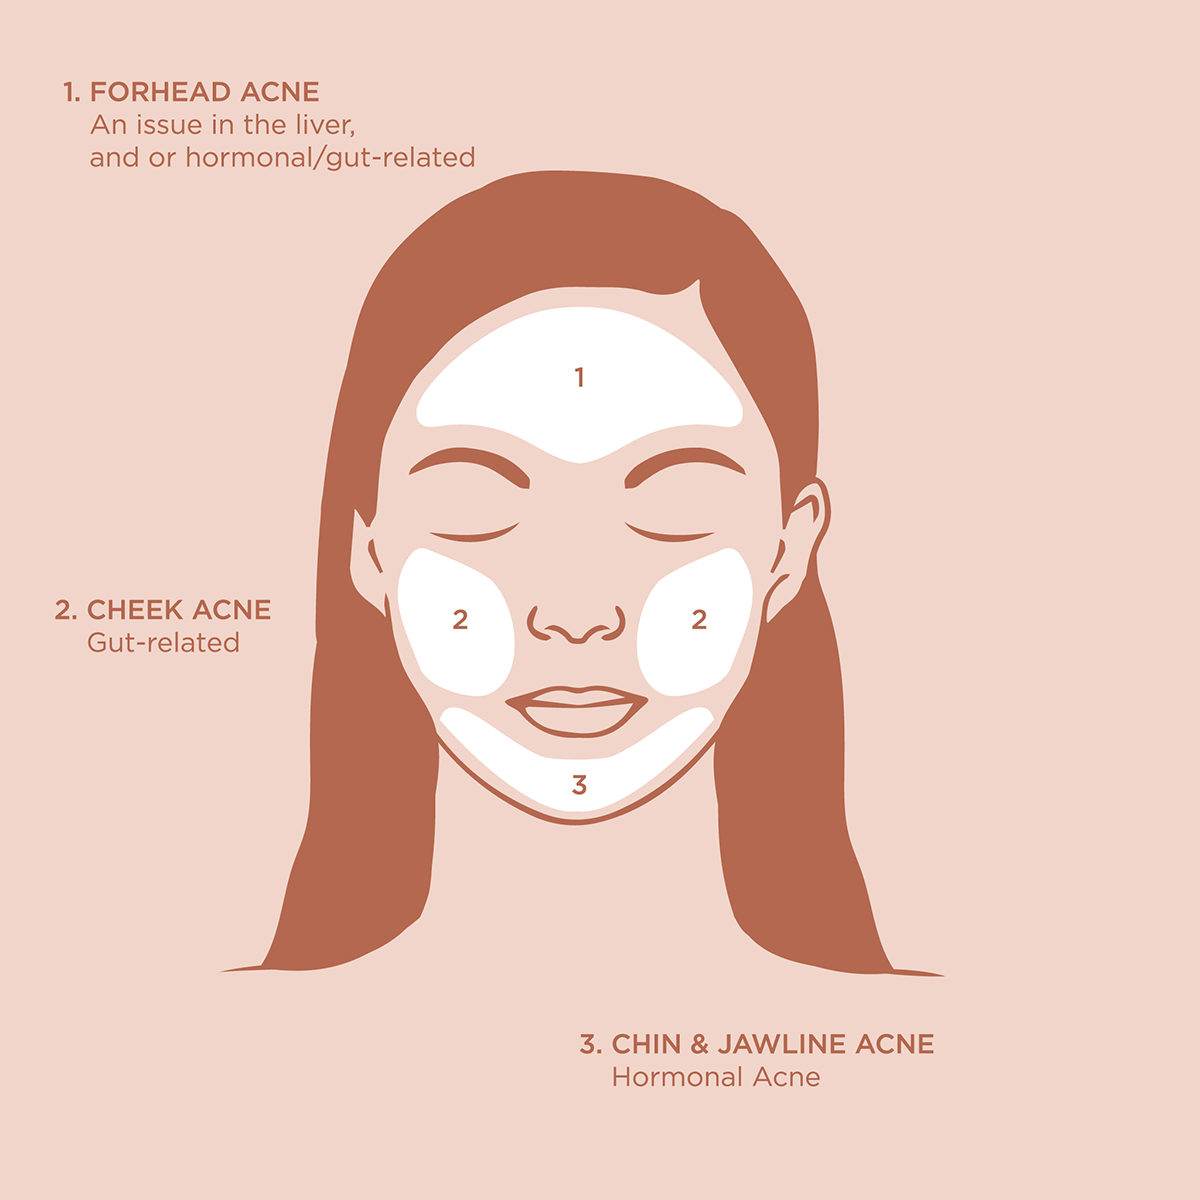 Diagram showing acne location and related causes